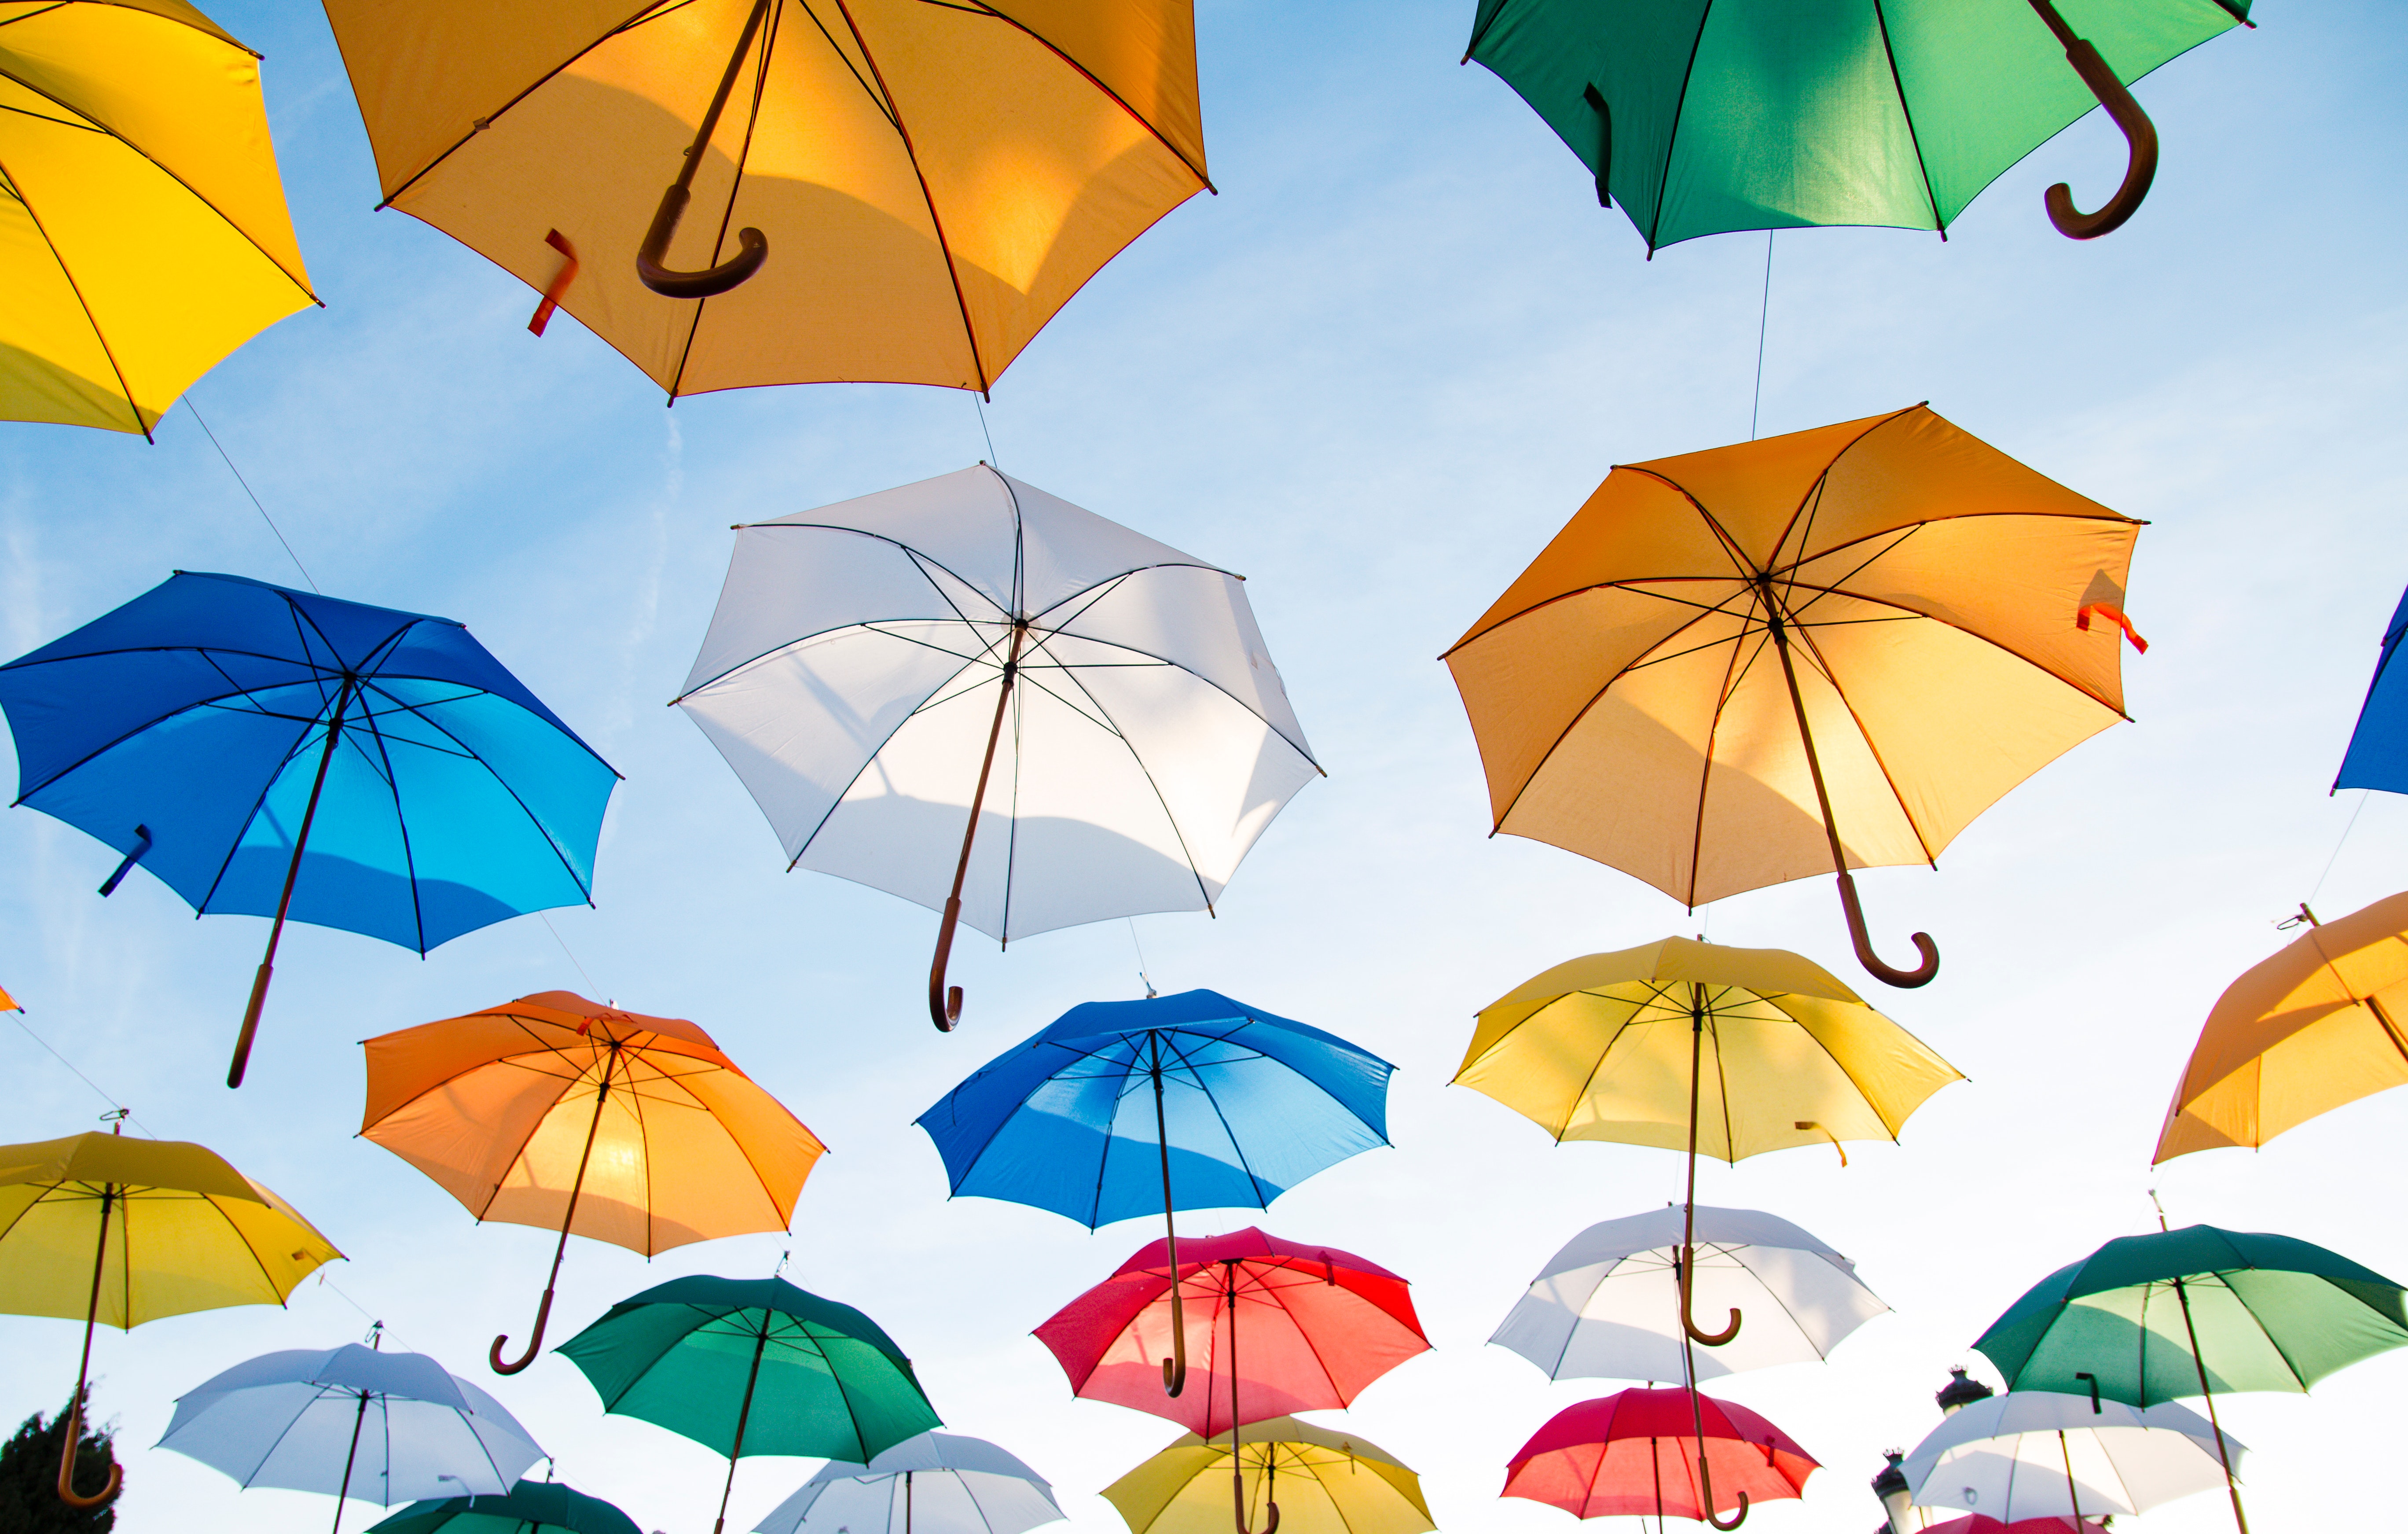 Group Umbrella Insurance – A New Benefit for AIA Virginia Members